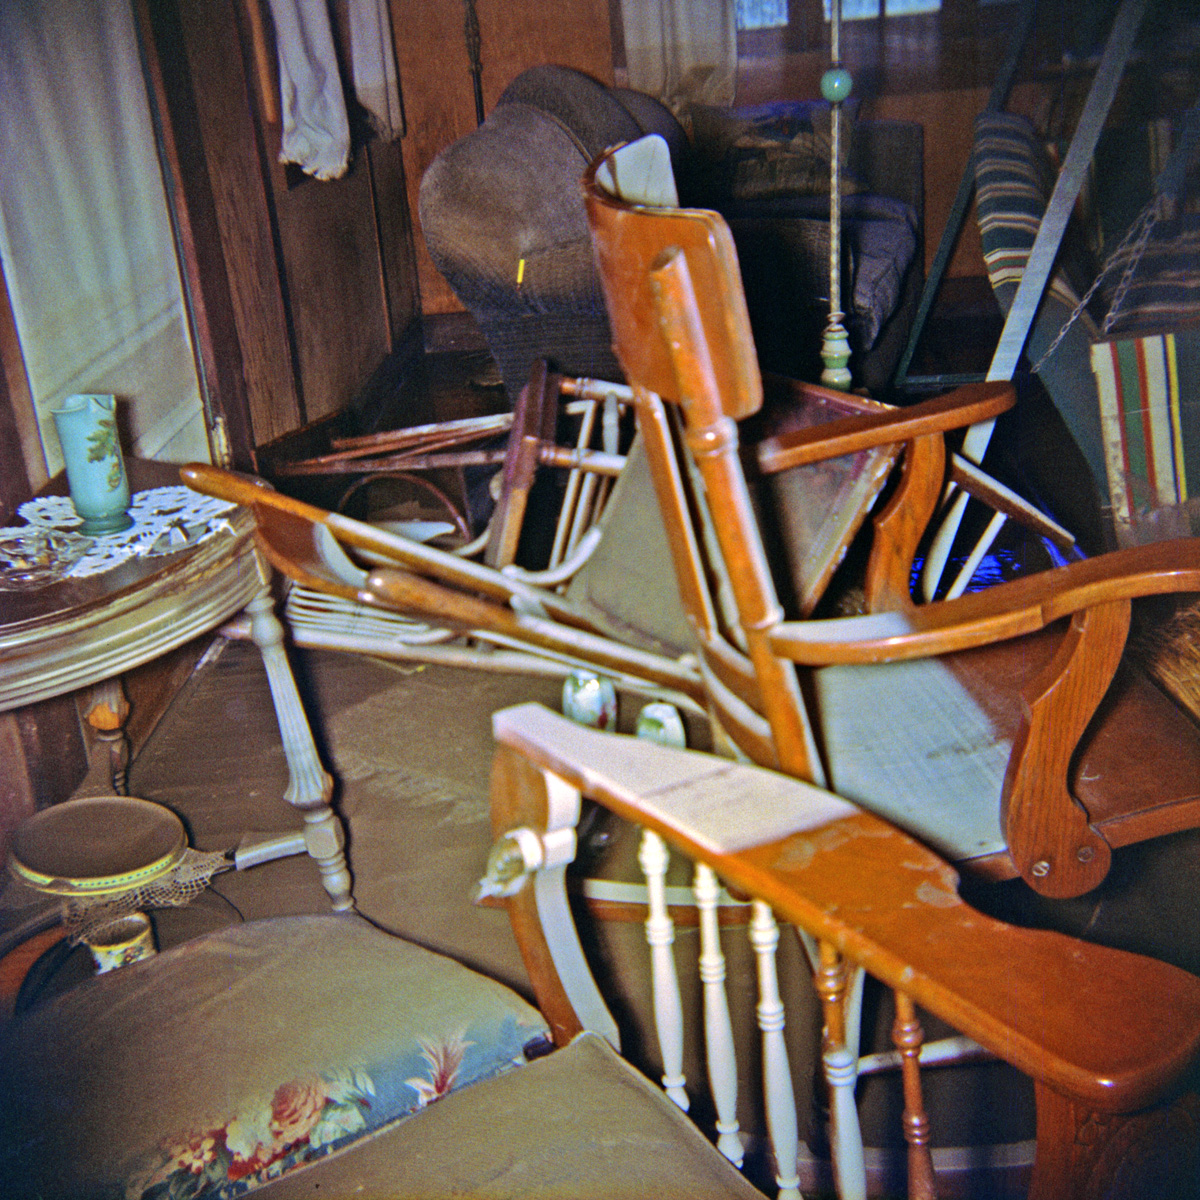 The living room of our summer house in East Guernewood, California, after the flood of December, 1955. Back then, this stuff was all considered junky enough for a summer cabin, but they'd be antiques today, particularly the Morris chair in the foreground. The porch swing had been brought inside for winter storage. This was definitely one of those world-of-reality crashes into world-of-childhood events for the 9 year-old me. I shot this on 2-1/4 square Kodacolor.

There's an exterior shot of the flood aftermath in the comments here.